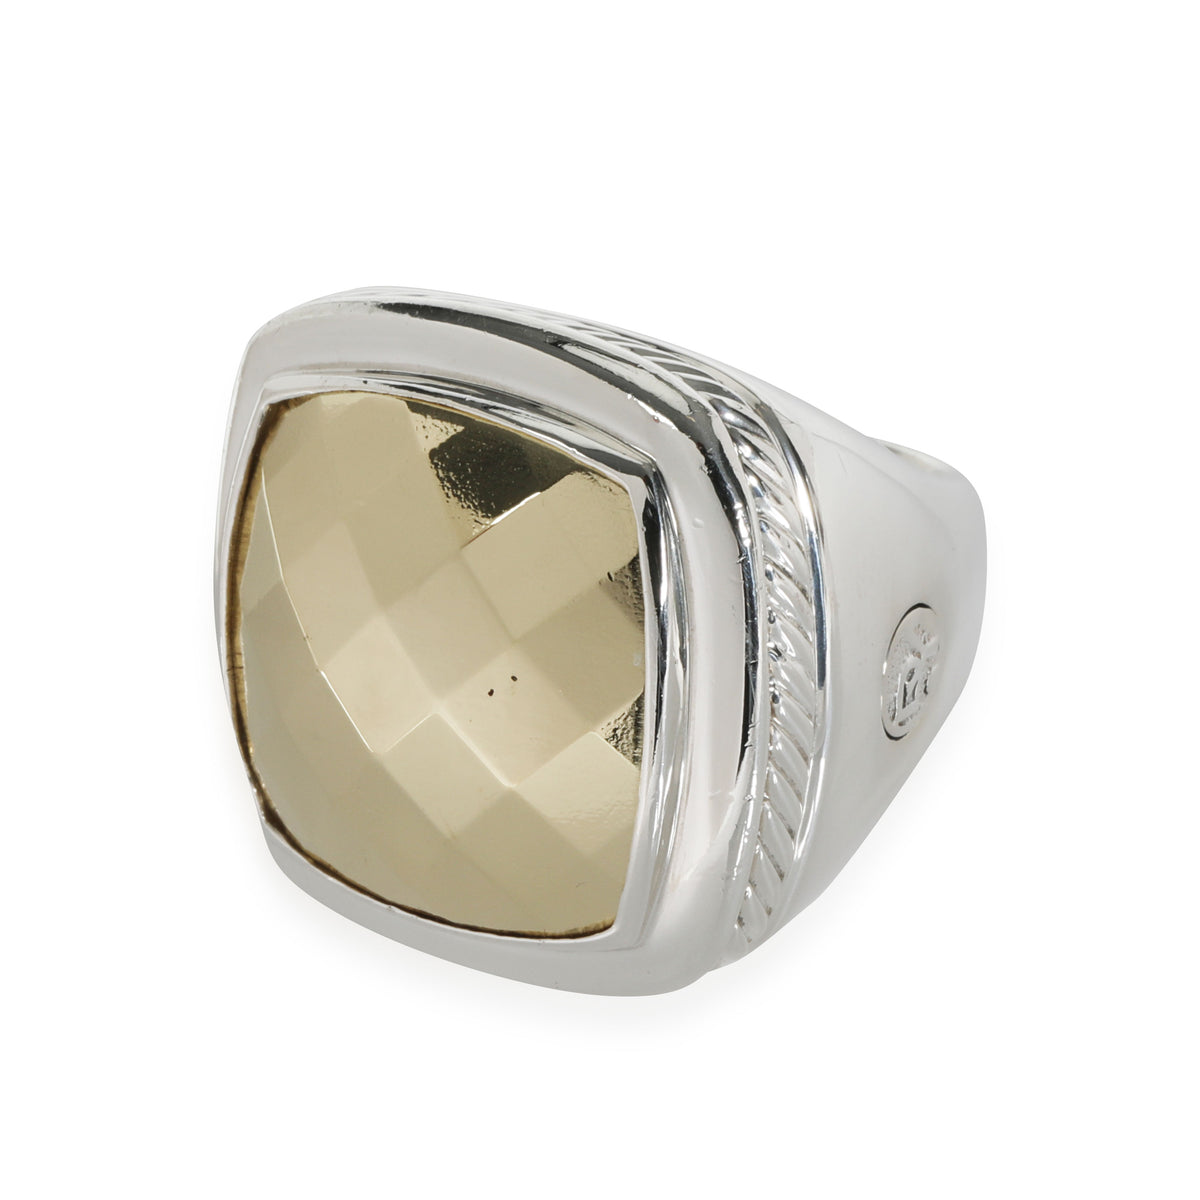 David Yurman Albion Faceted Dome Ring in 18kt Gold/Sterling